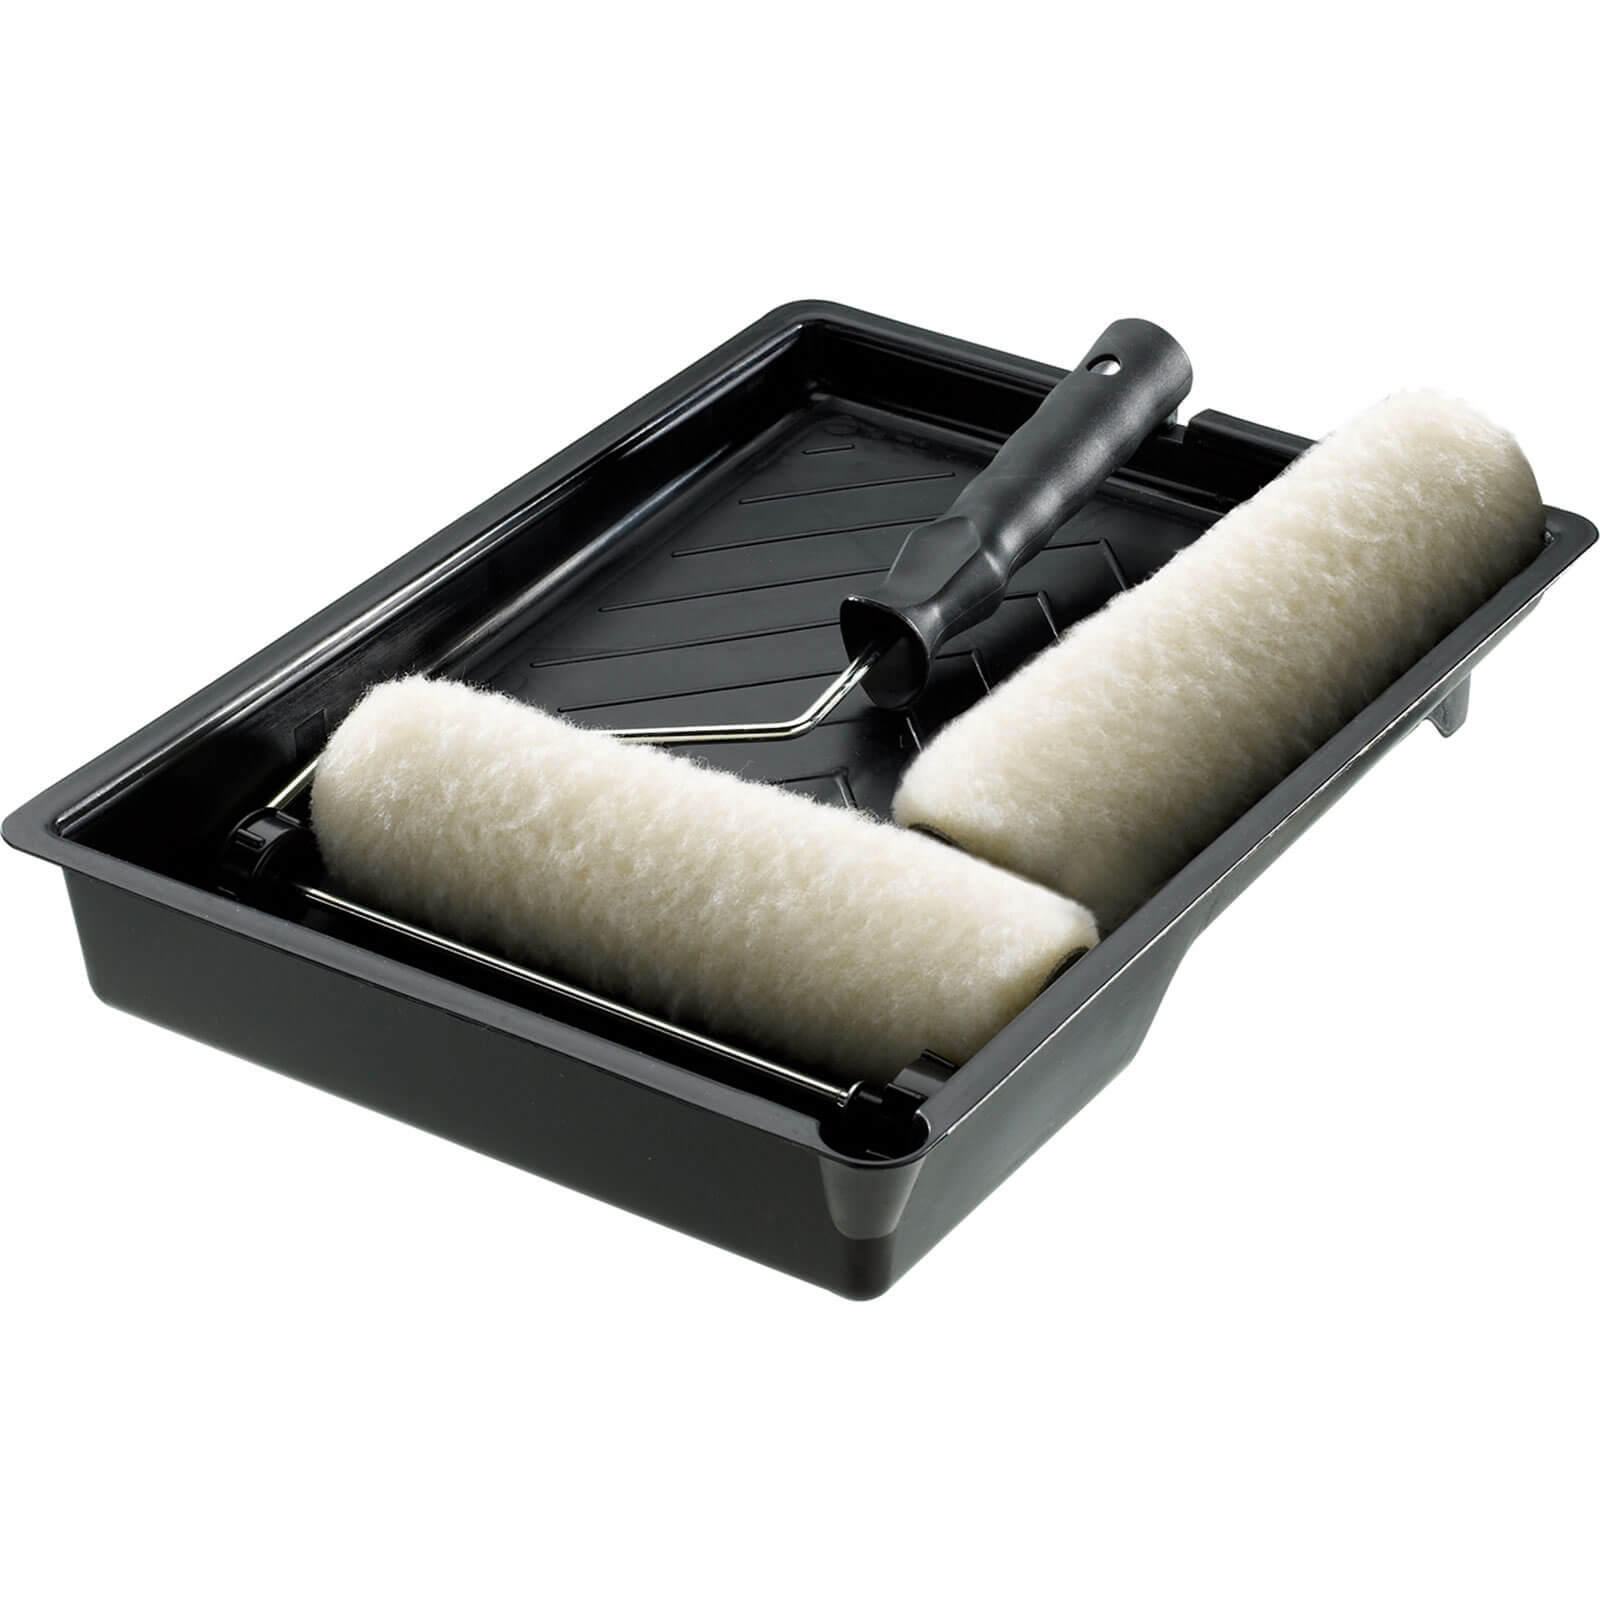 Stanley 230mm / 9" Paint Roller Tray Kit with 2 Paint Roller Sleeves